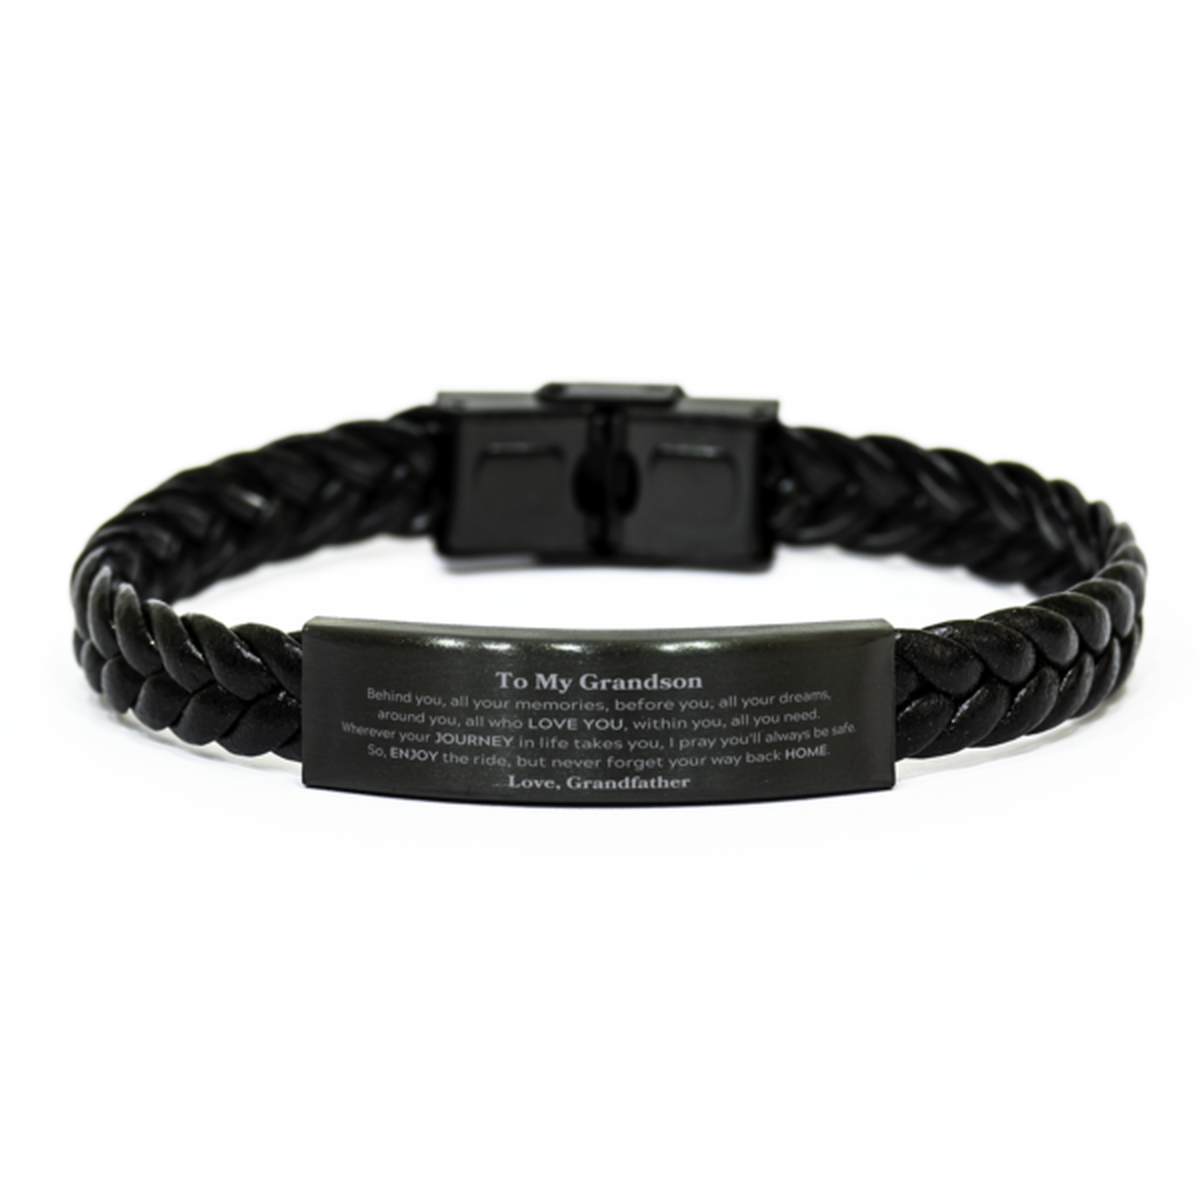 To My Grandson Graduation Gifts from Grandfather, Grandson Braided Leather Bracelet Christmas Birthday Gifts for Grandson Behind you, all your memories, before you, all your dreams. Love, Grandfather